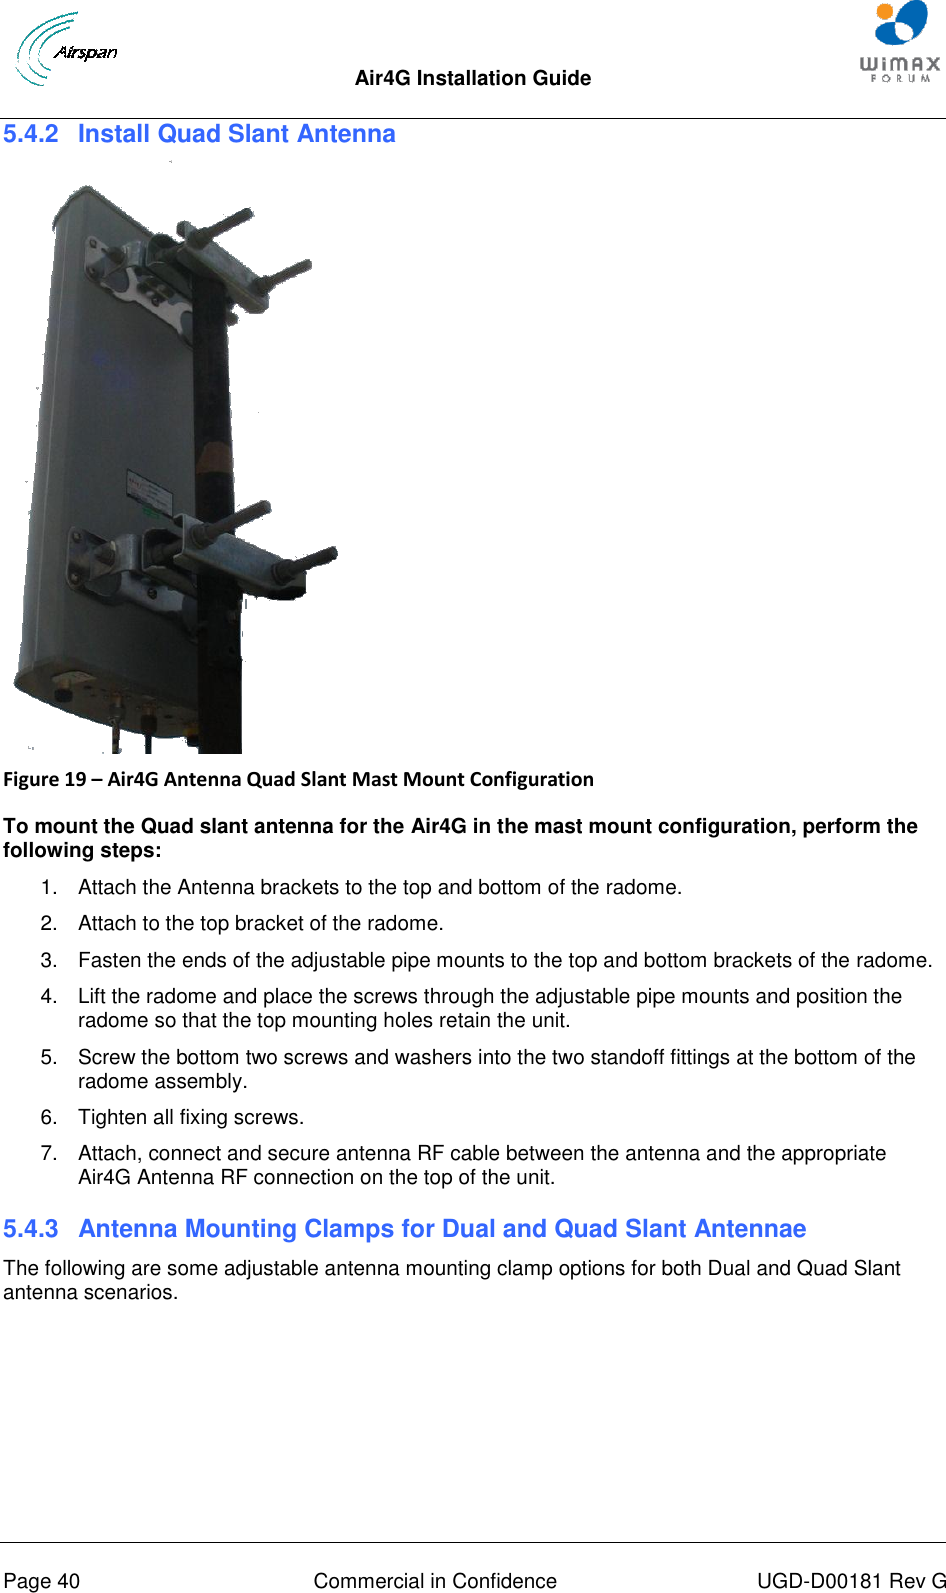  Air4G Installation Guide       Page 40  Commercial in Confidence  UGD-D00181 Rev G 5.4.2  Install Quad Slant Antenna    Figure 19 – Air4G Antenna Quad Slant Mast Mount Configuration  To mount the Quad slant antenna for the Air4G in the mast mount configuration, perform the following steps: 1.  Attach the Antenna brackets to the top and bottom of the radome.  2.  Attach to the top bracket of the radome. 3.  Fasten the ends of the adjustable pipe mounts to the top and bottom brackets of the radome. 4.  Lift the radome and place the screws through the adjustable pipe mounts and position the radome so that the top mounting holes retain the unit. 5.  Screw the bottom two screws and washers into the two standoff fittings at the bottom of the radome assembly. 6.  Tighten all fixing screws. 7.  Attach, connect and secure antenna RF cable between the antenna and the appropriate Air4G Antenna RF connection on the top of the unit. 5.4.3  Antenna Mounting Clamps for Dual and Quad Slant Antennae The following are some adjustable antenna mounting clamp options for both Dual and Quad Slant antenna scenarios.  